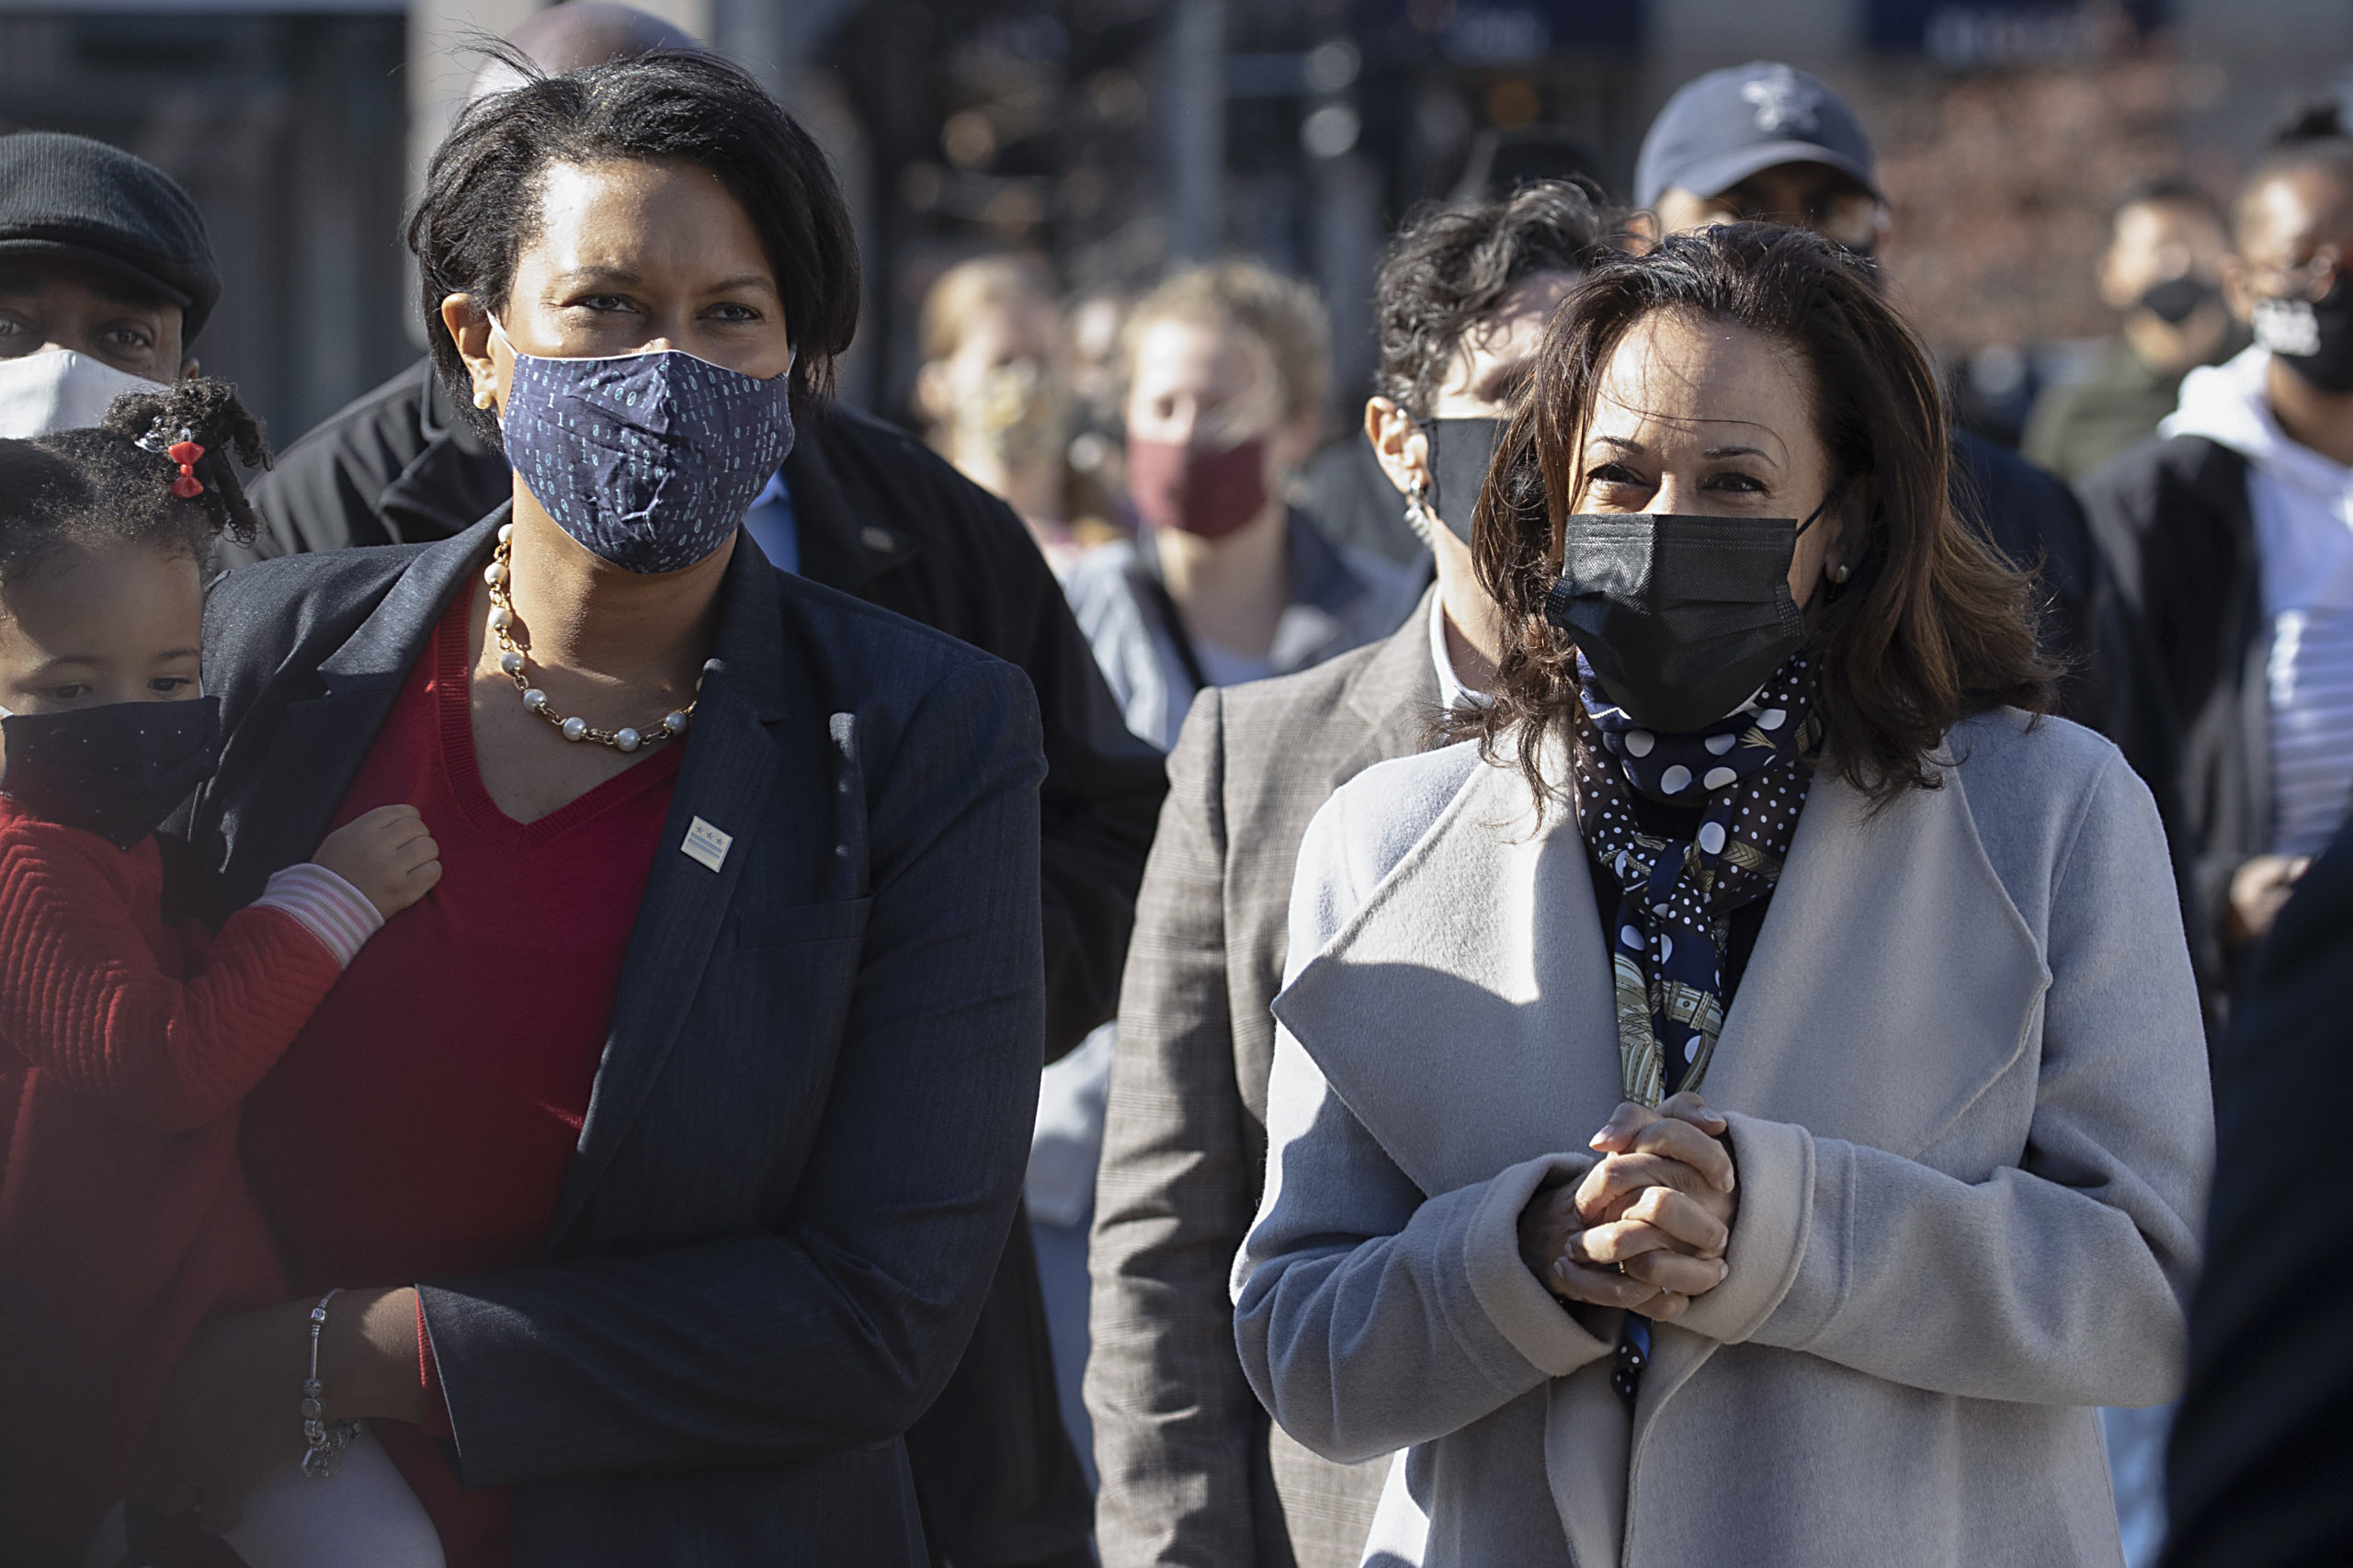 WASHINGTON, DC - NOVEMBER 28: DC Mayor Muriel Bowser and U.S. Vice President-elect Kamala Harris walk at the Downton Holiday Market on November 28, 2020 in Washington, DC. Vice President-Elect Kamala Harris made it point to shop at local shops for small business Saturday. (Tasos Katopodis/Getty Images)